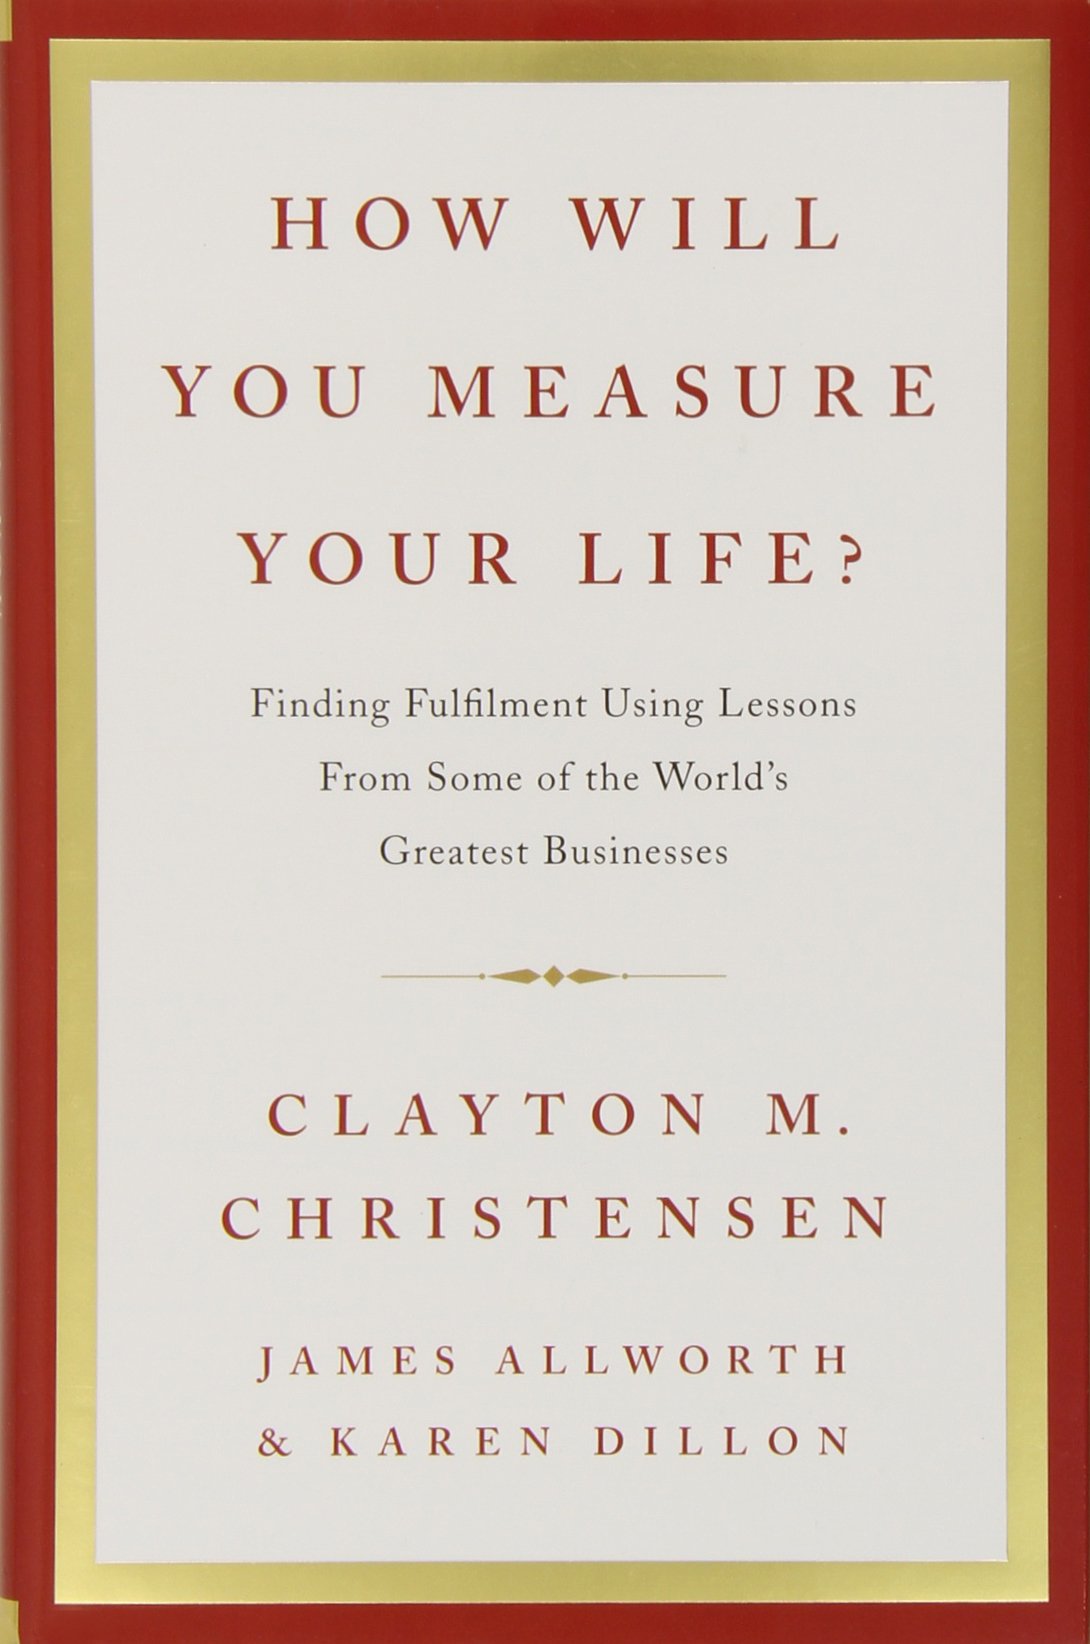 How will you measure your life – Some quotes from the book